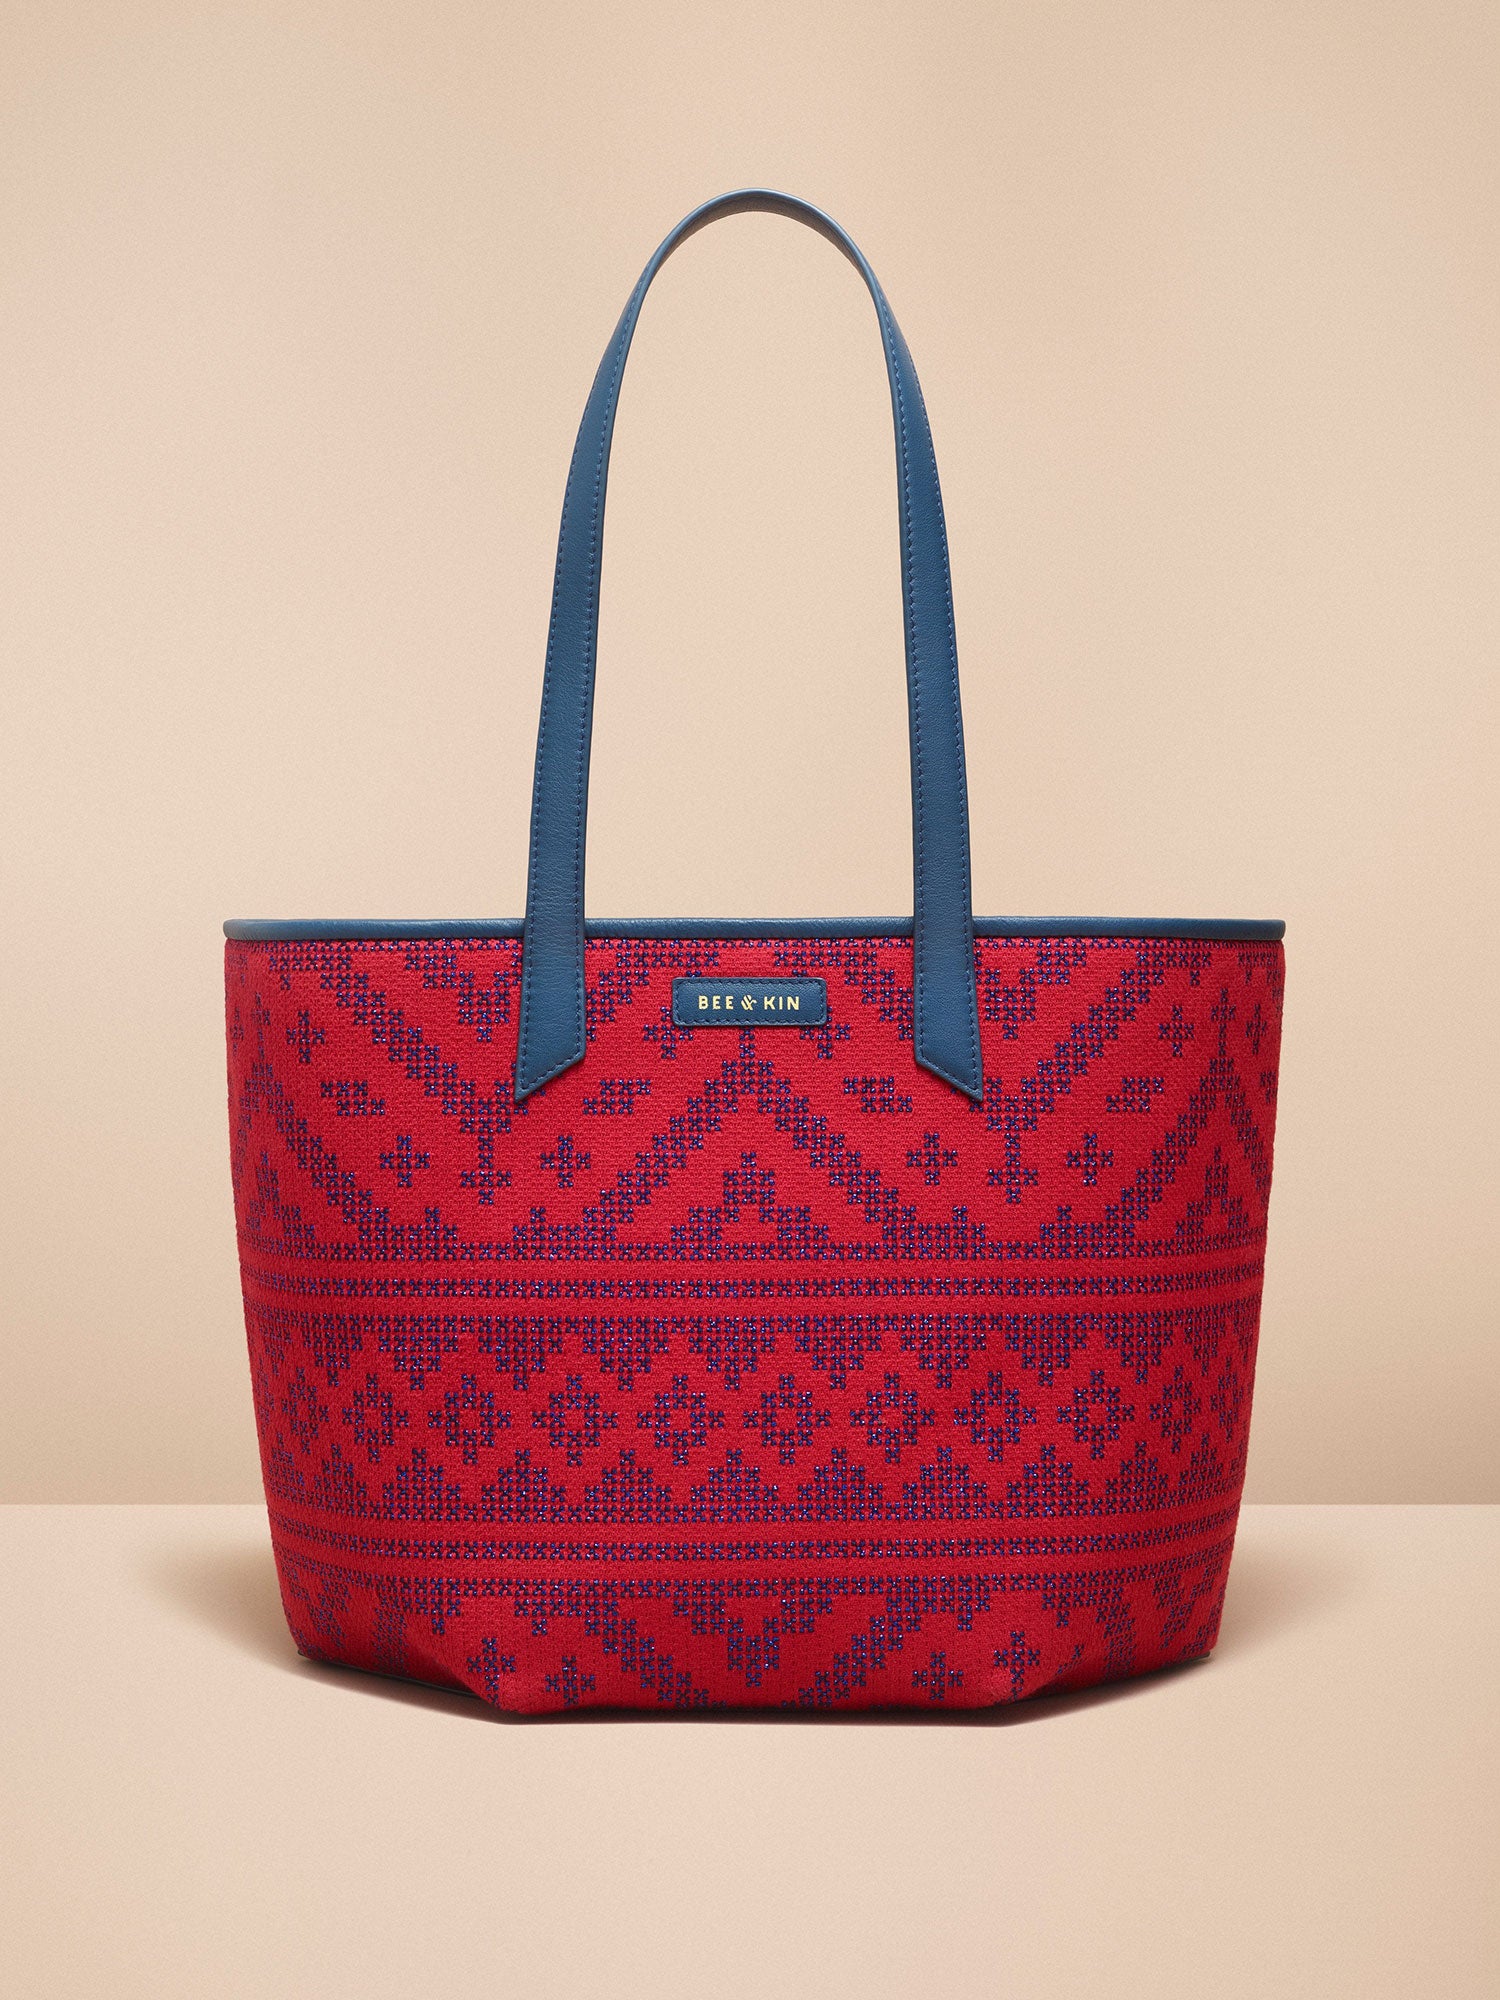 The Expert Carryall Tote